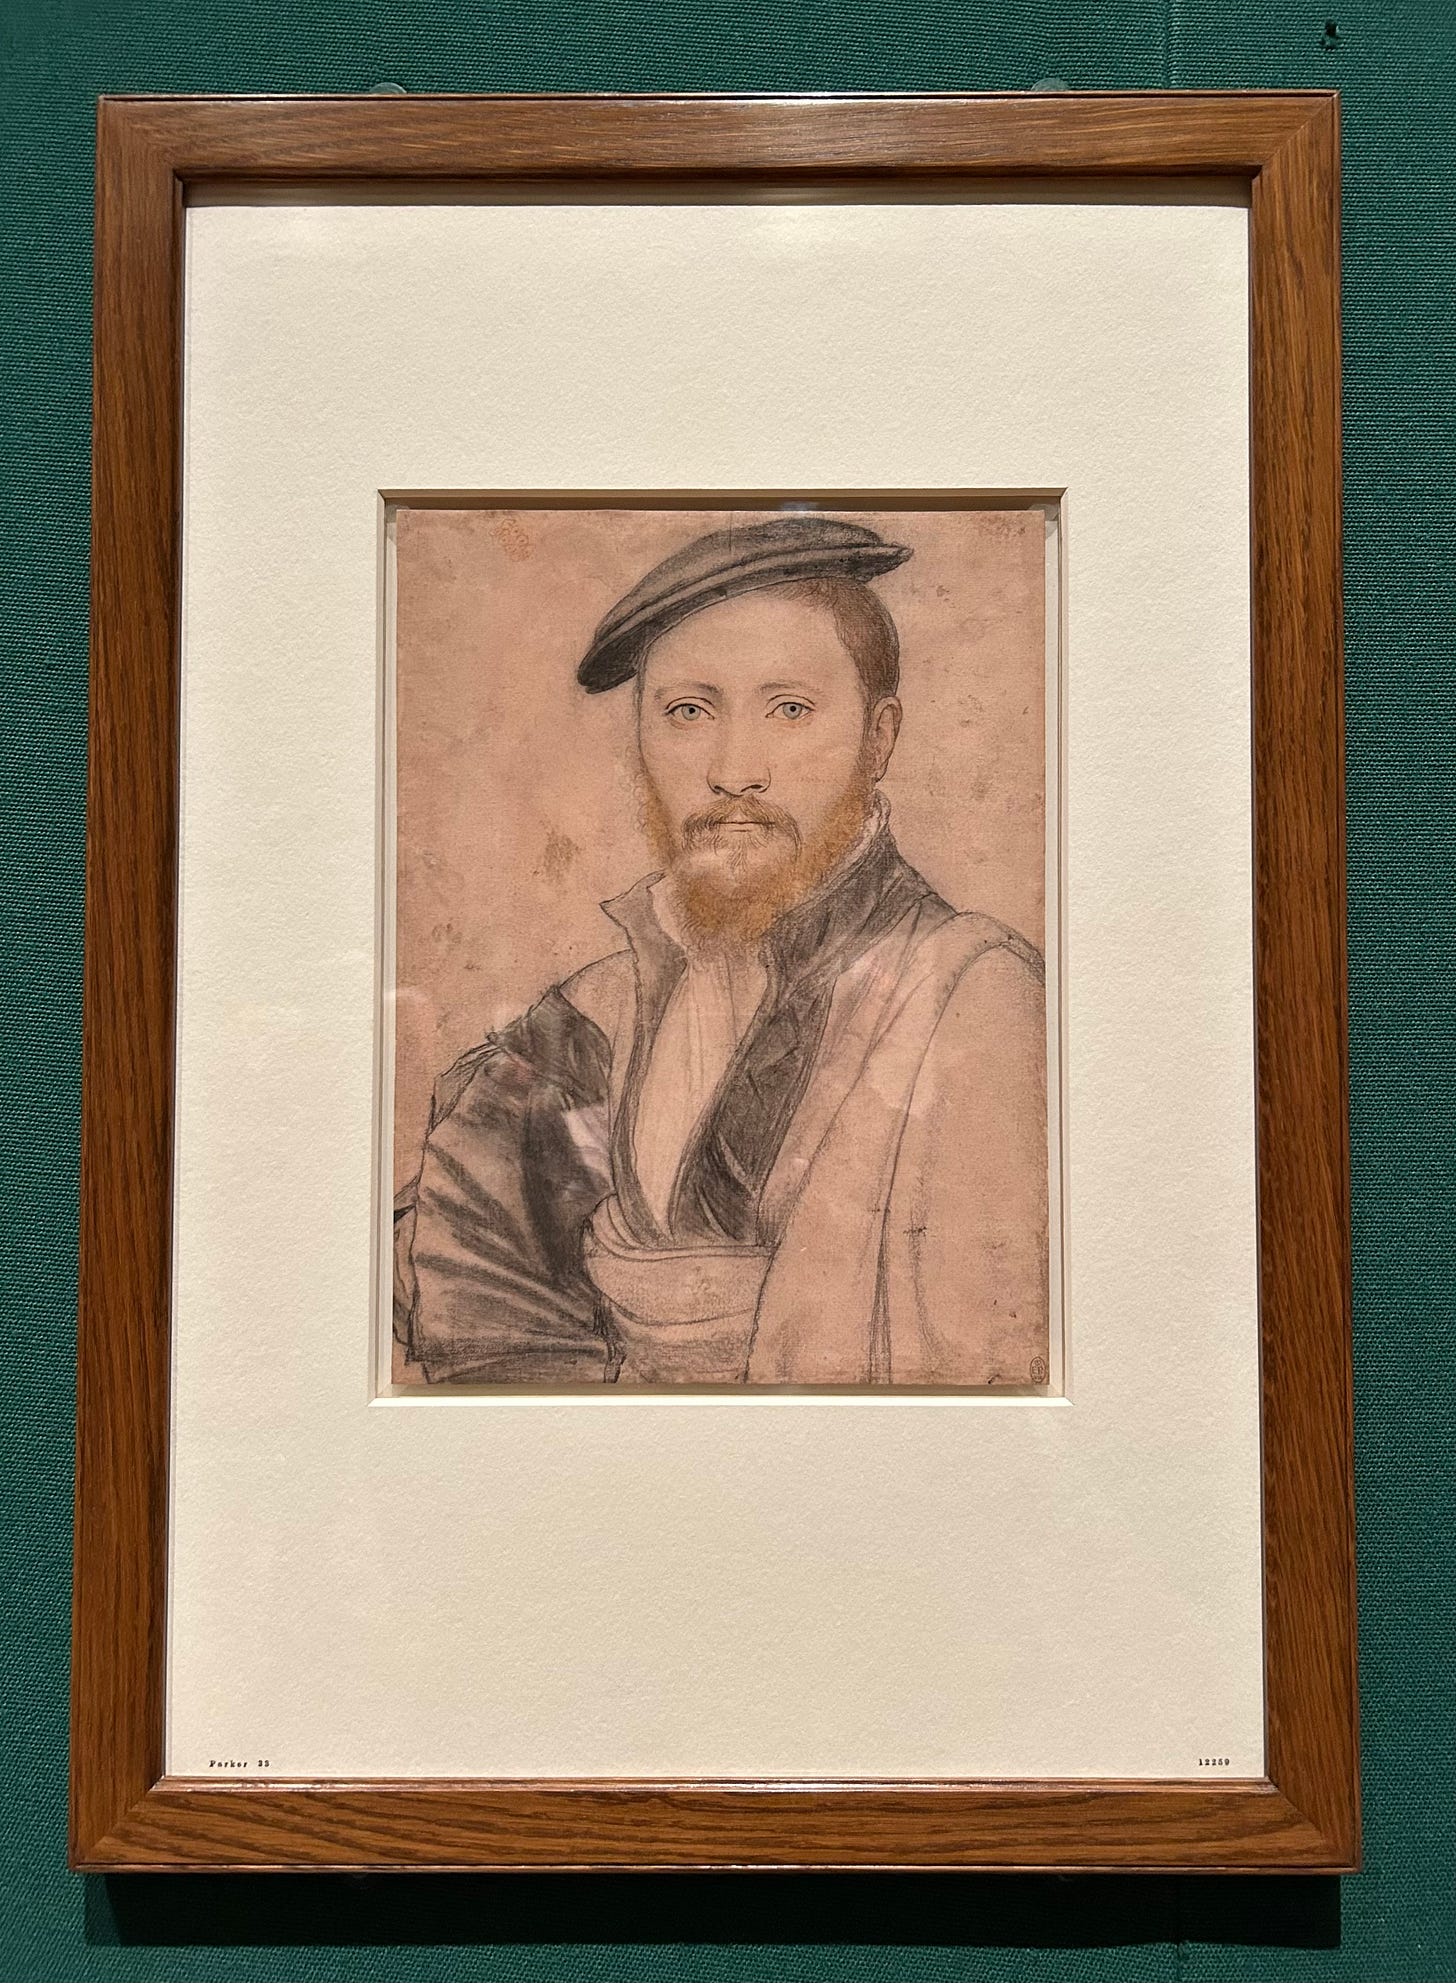 A drawing of a young man with beard and hat staring straight at the painter. This is a C16th drawing.